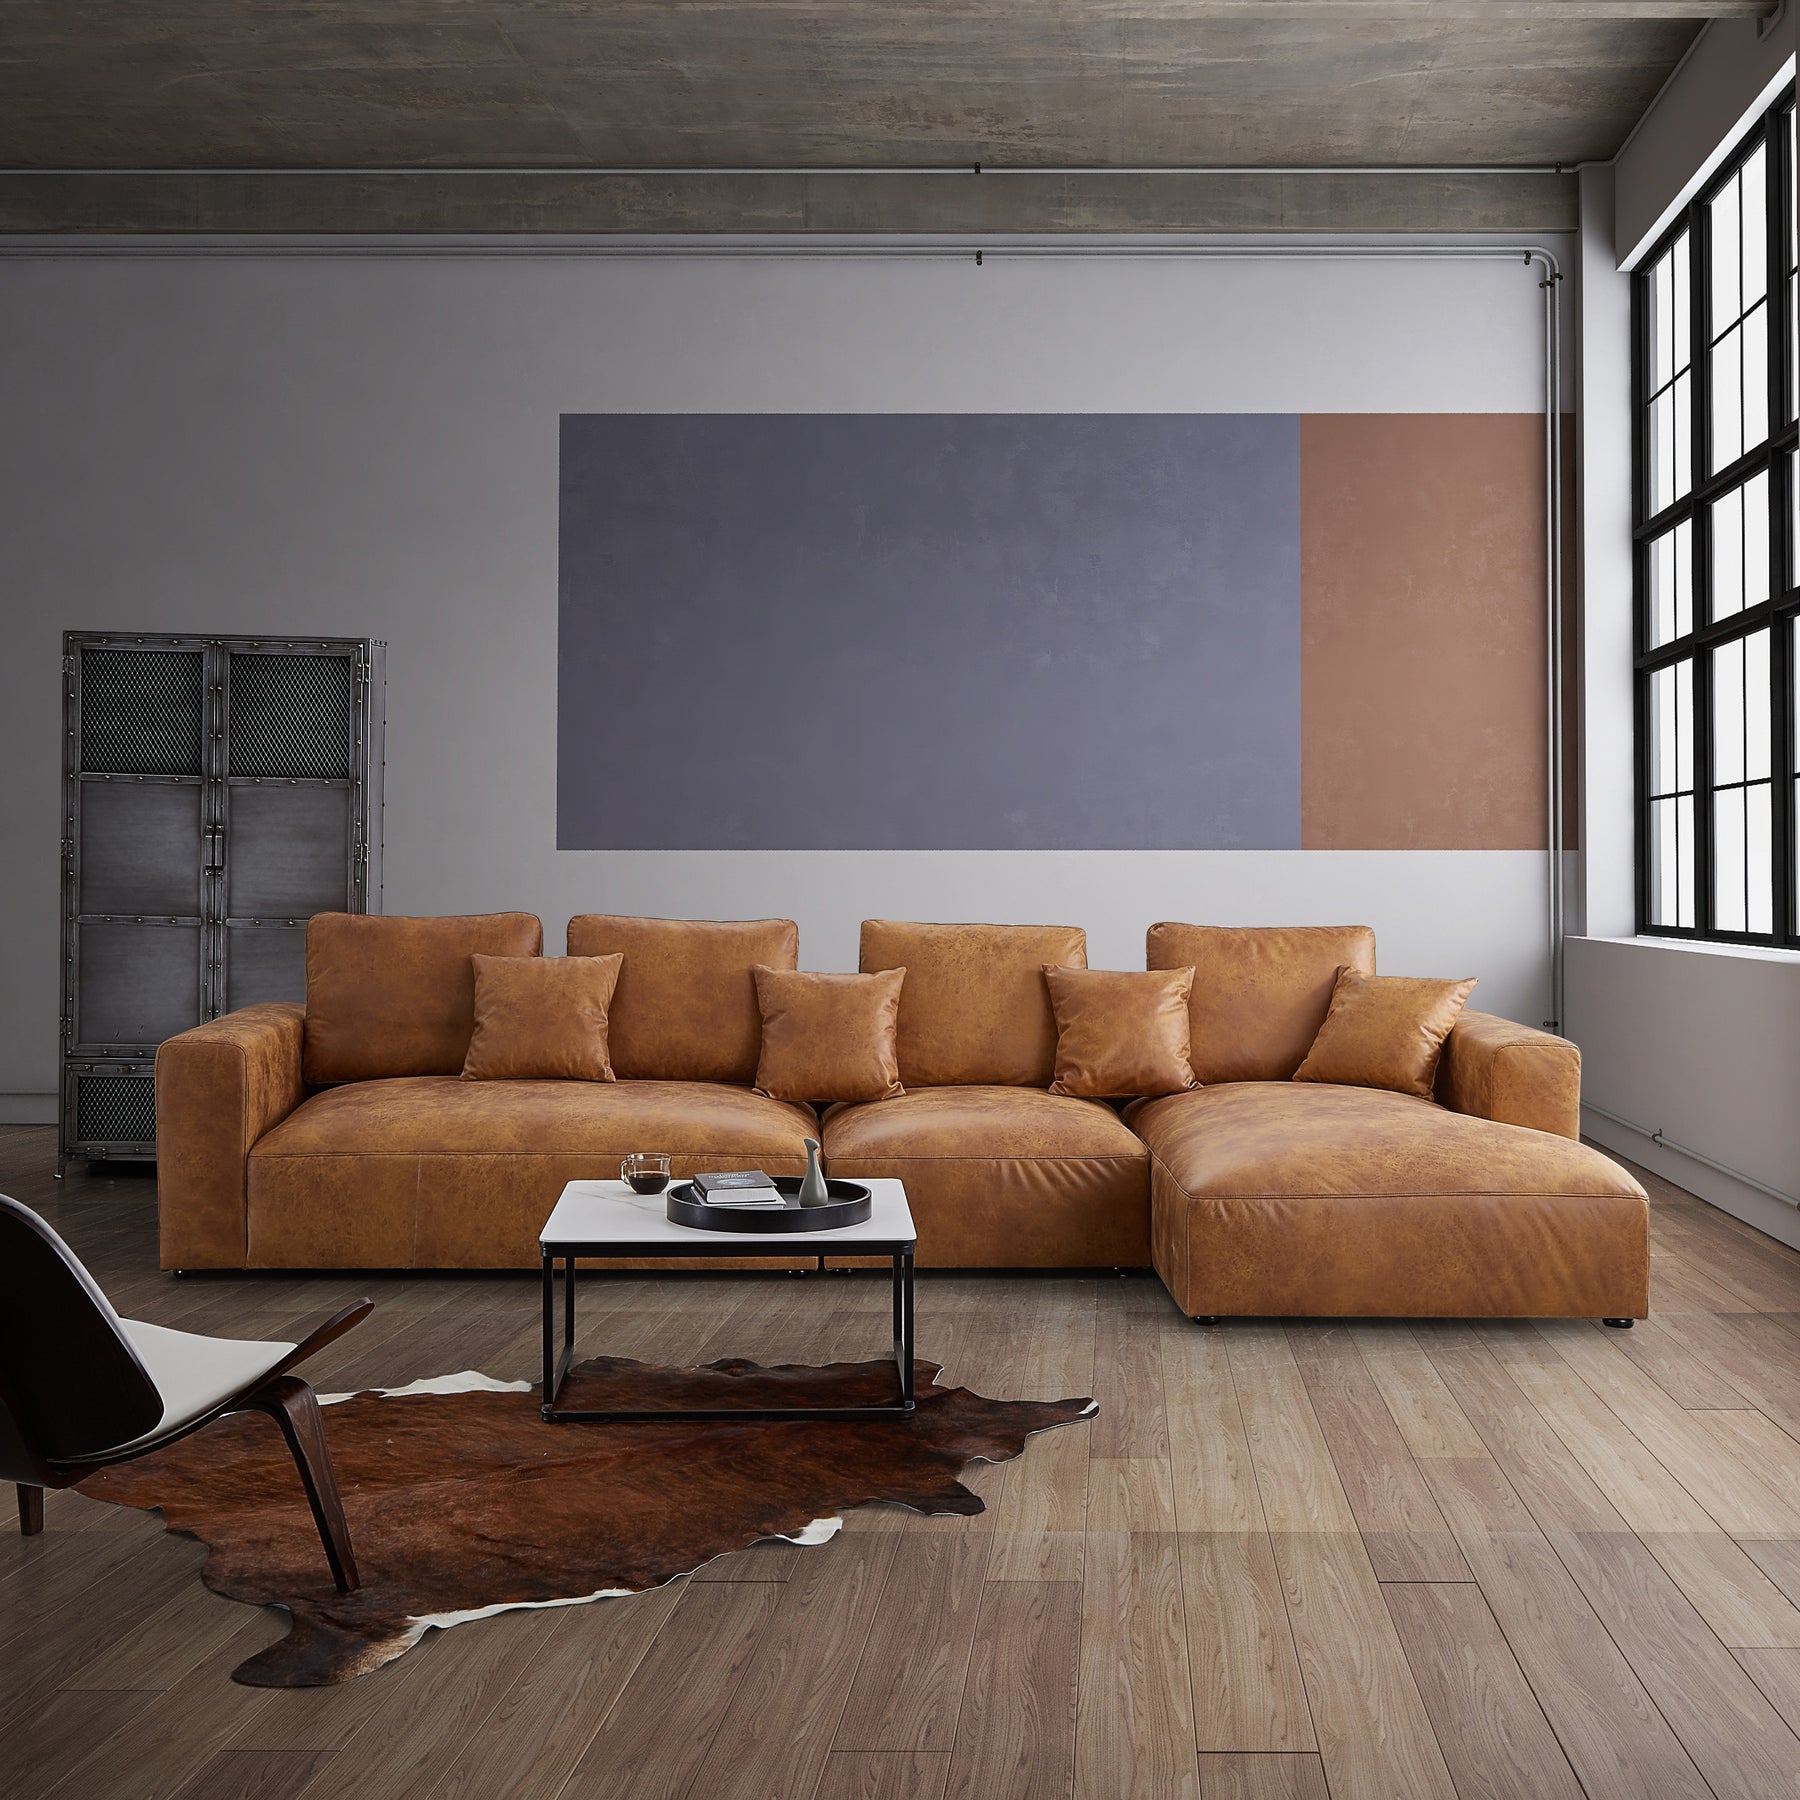 synet sværd Erobre Salo Antique Industrial Air Leather Closed Sectional – Trends Furniture Inc